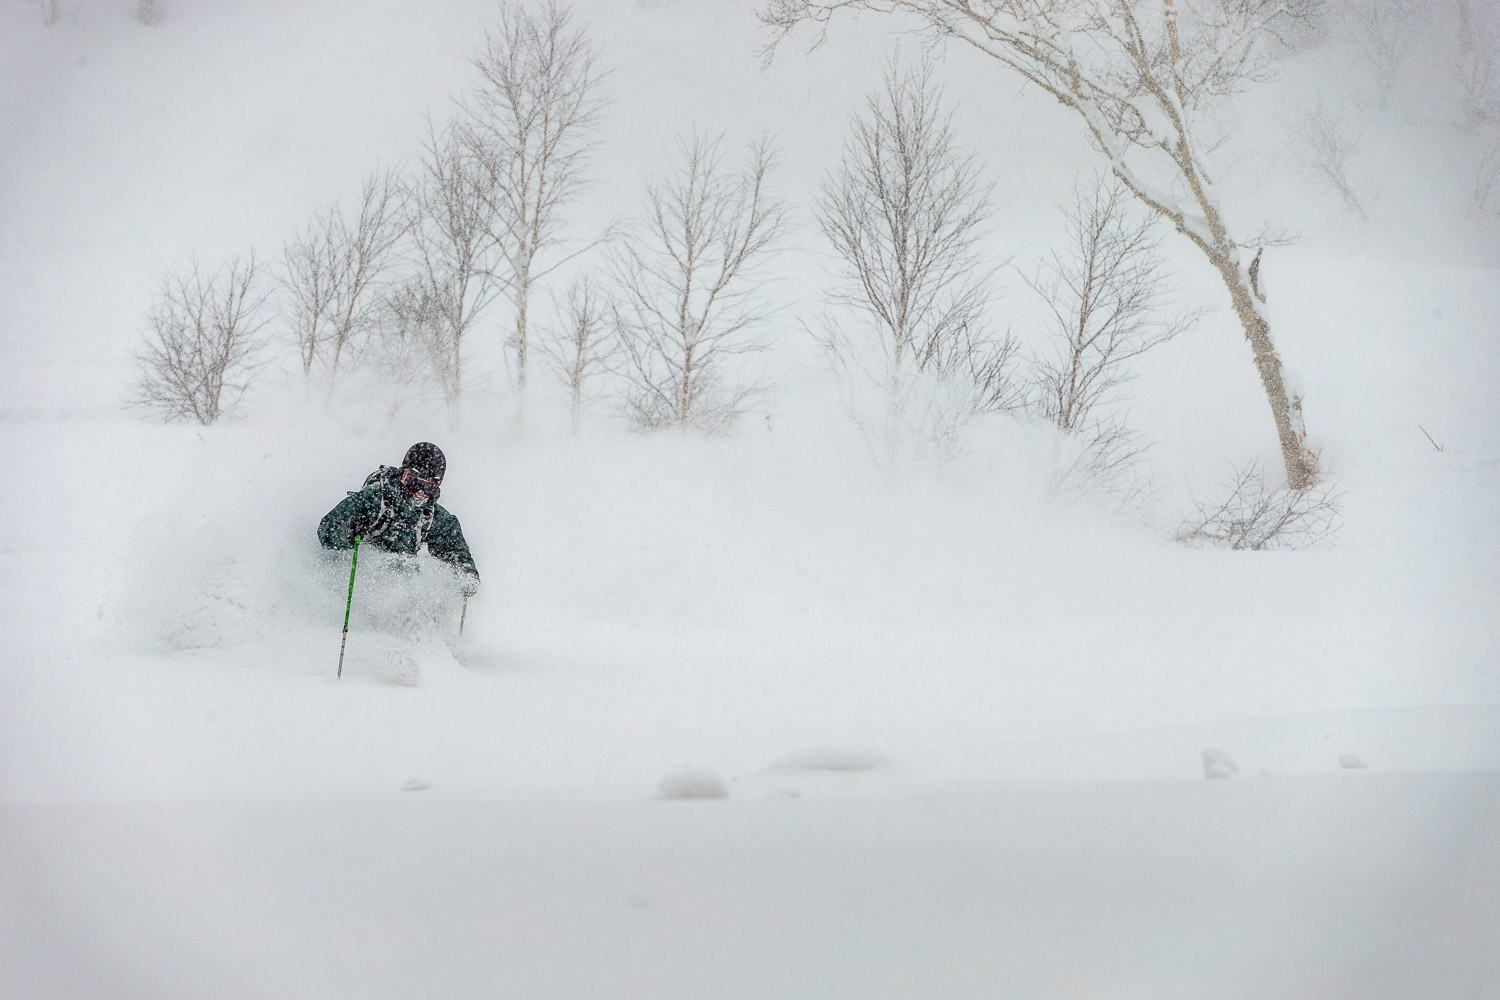 Tom Ritsch plundering pow with Shimamaki Snowcats.